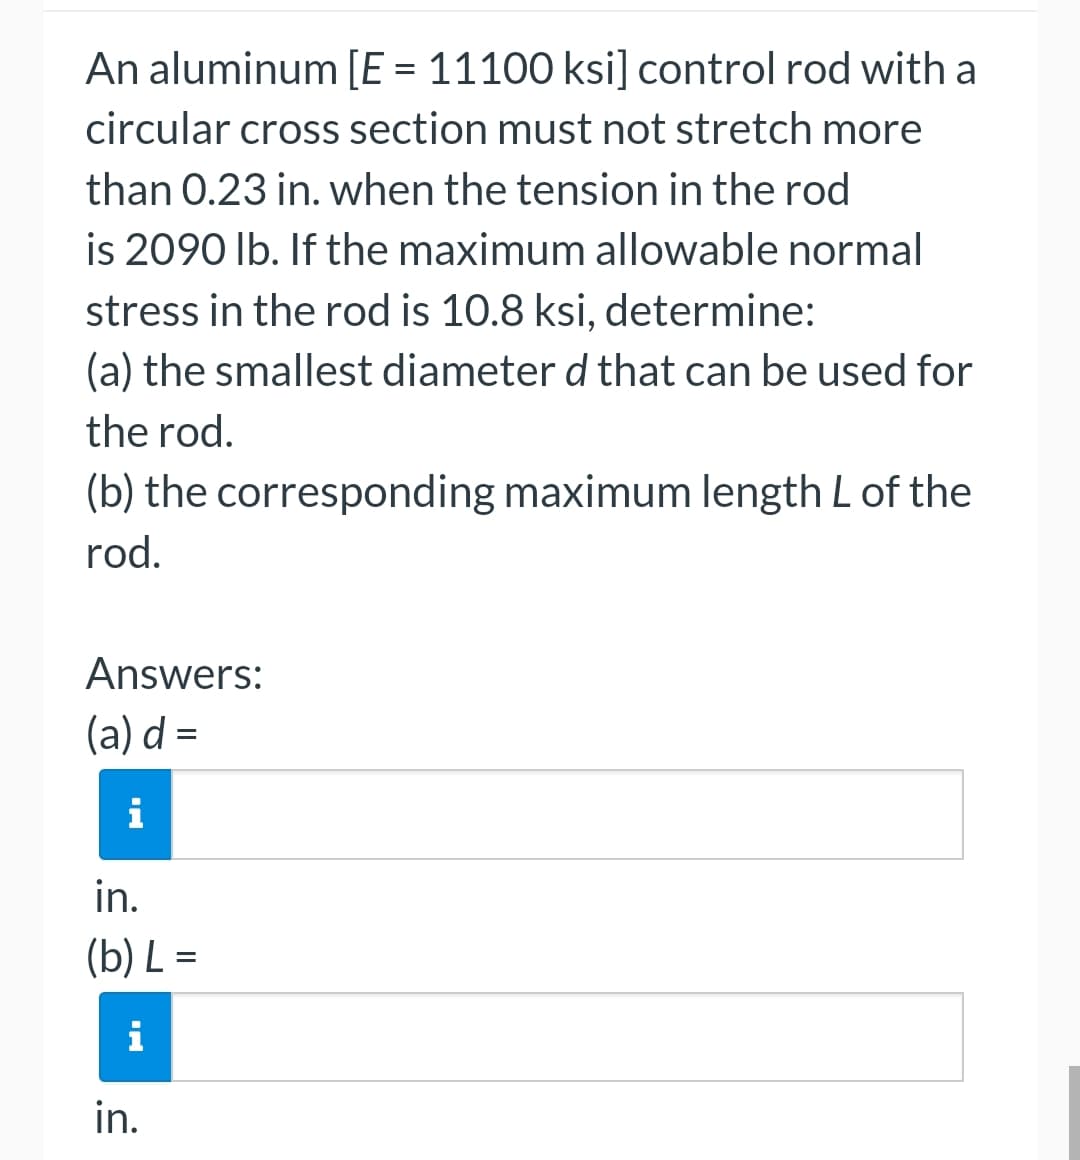 An aluminum [E = 11100 ksi] control rod with a
circular cross section must not stretch more
than 0.23 in. when the tension in the rod
is 2090 lb. If the maximum allowable normal
stress in the rod is 10.8 ksi, determine:
(a) the smallest diameter d that can be used for
the rod.
(b) the corresponding maximum length L of the
rod.
Answers:
(a) d=
i
in.
(b) L=
in.